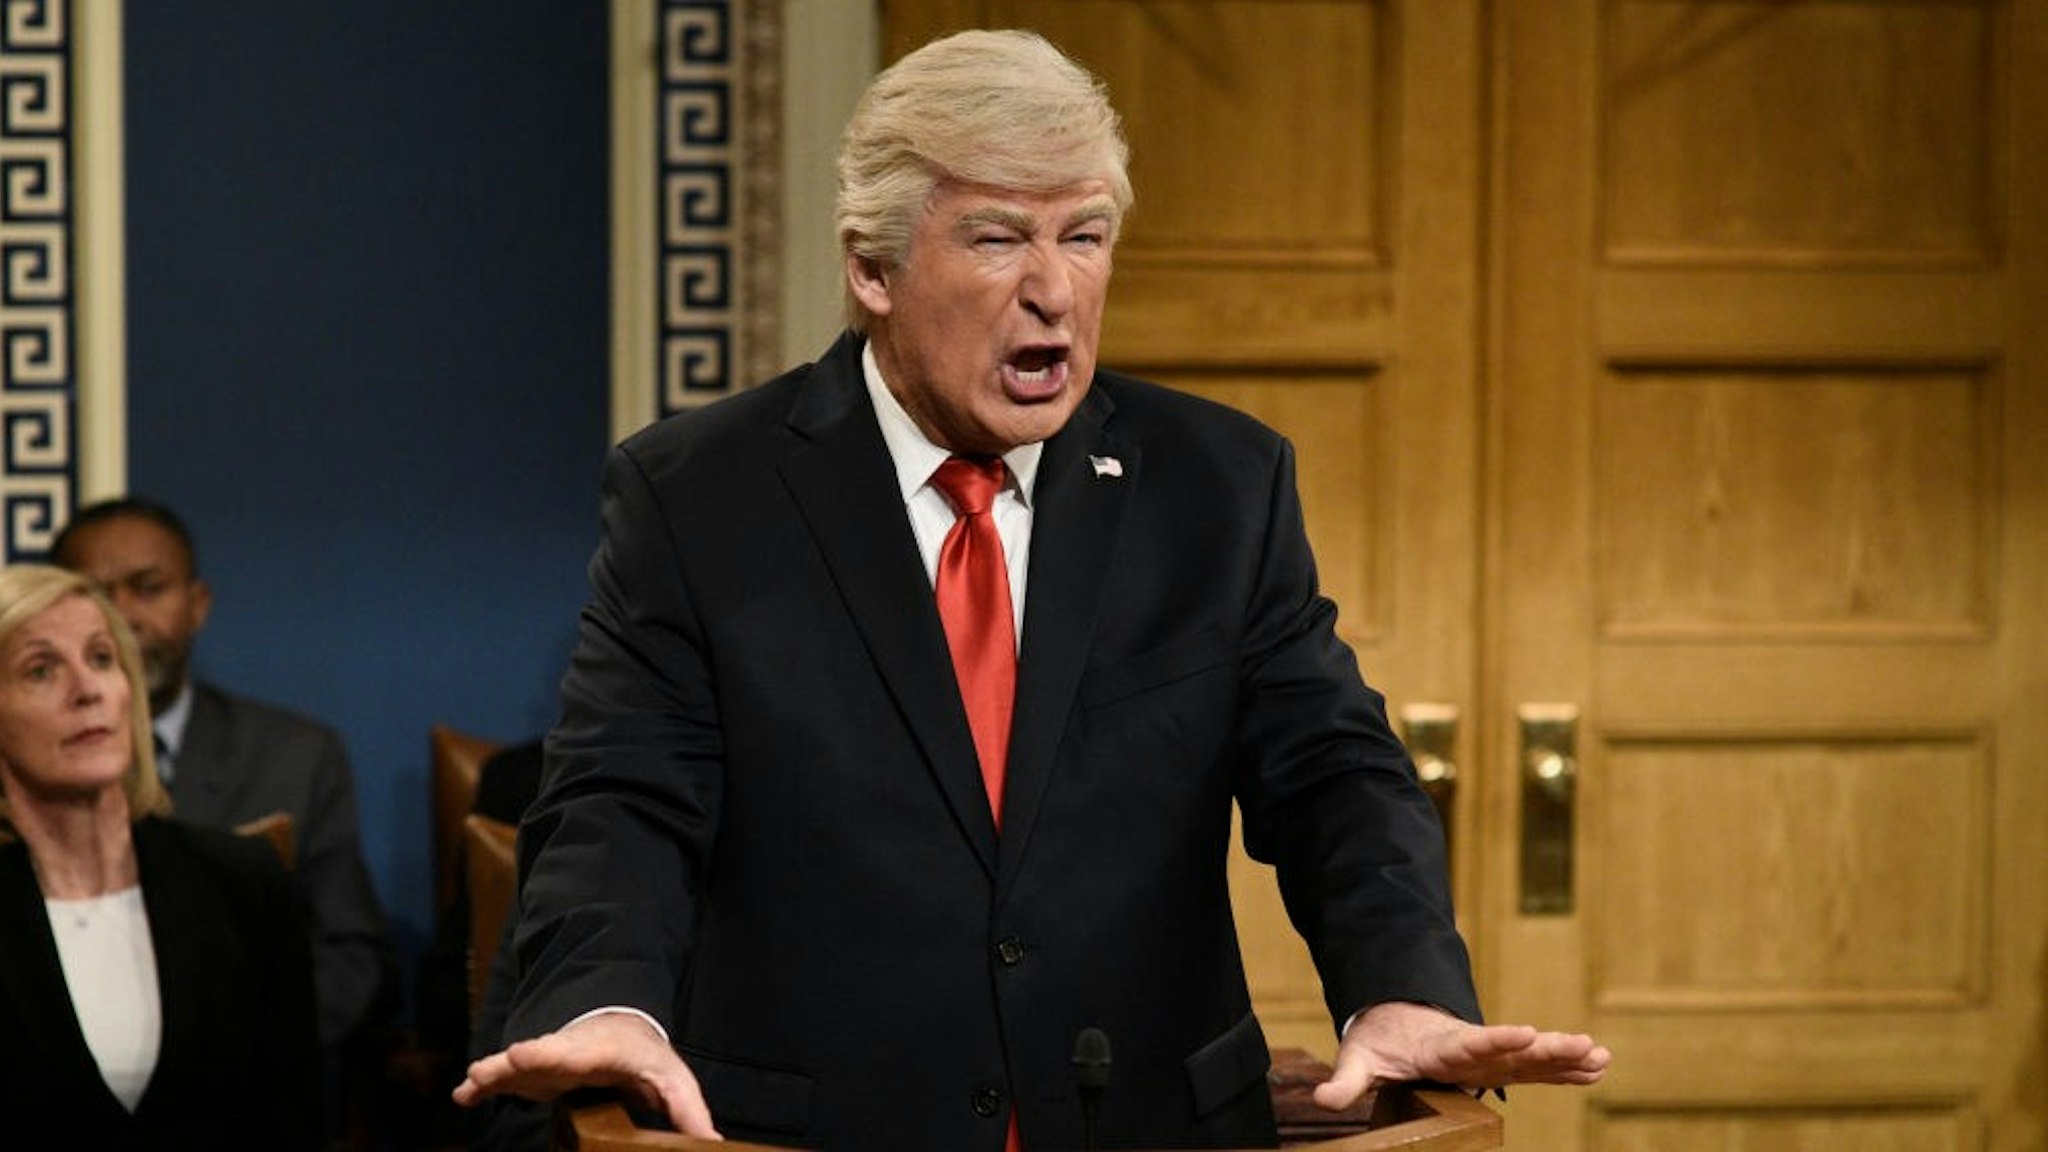 SATURDAY NIGHT LIVE -- "JJ Watt" Episode 1779 -- Pictured: Alec Baldwin as Donald Trump during the "Impeachment Fantasy" Cold Open on Saturday, February 1, 2020 -- (Photo by: